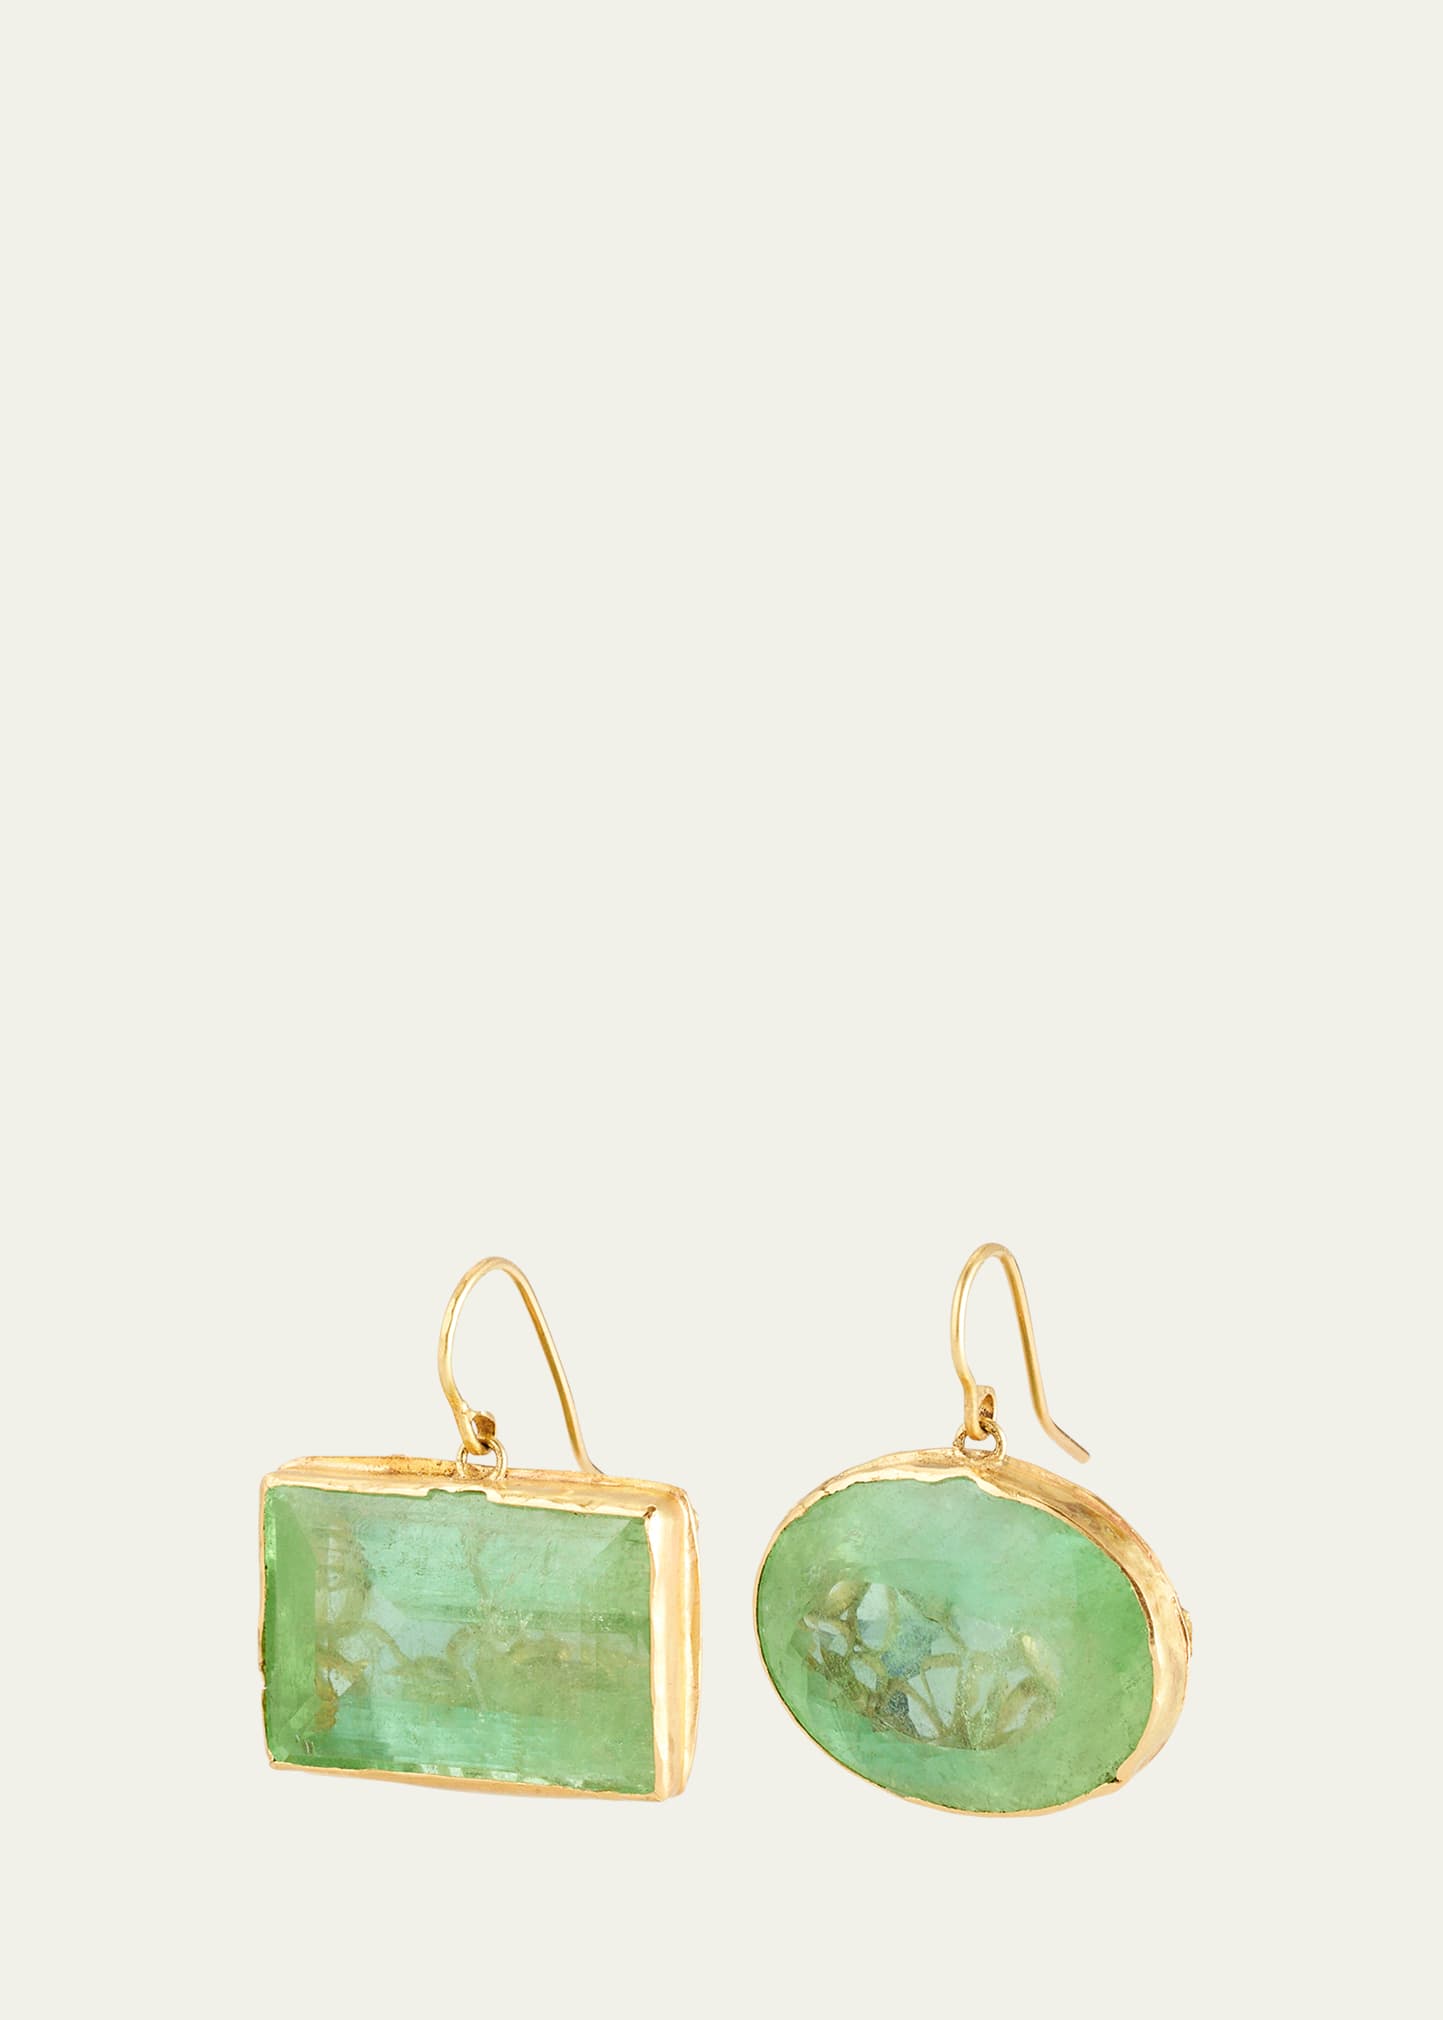 18K Yellow Gold Mismatched Earrings with Mint Green Tourmalines